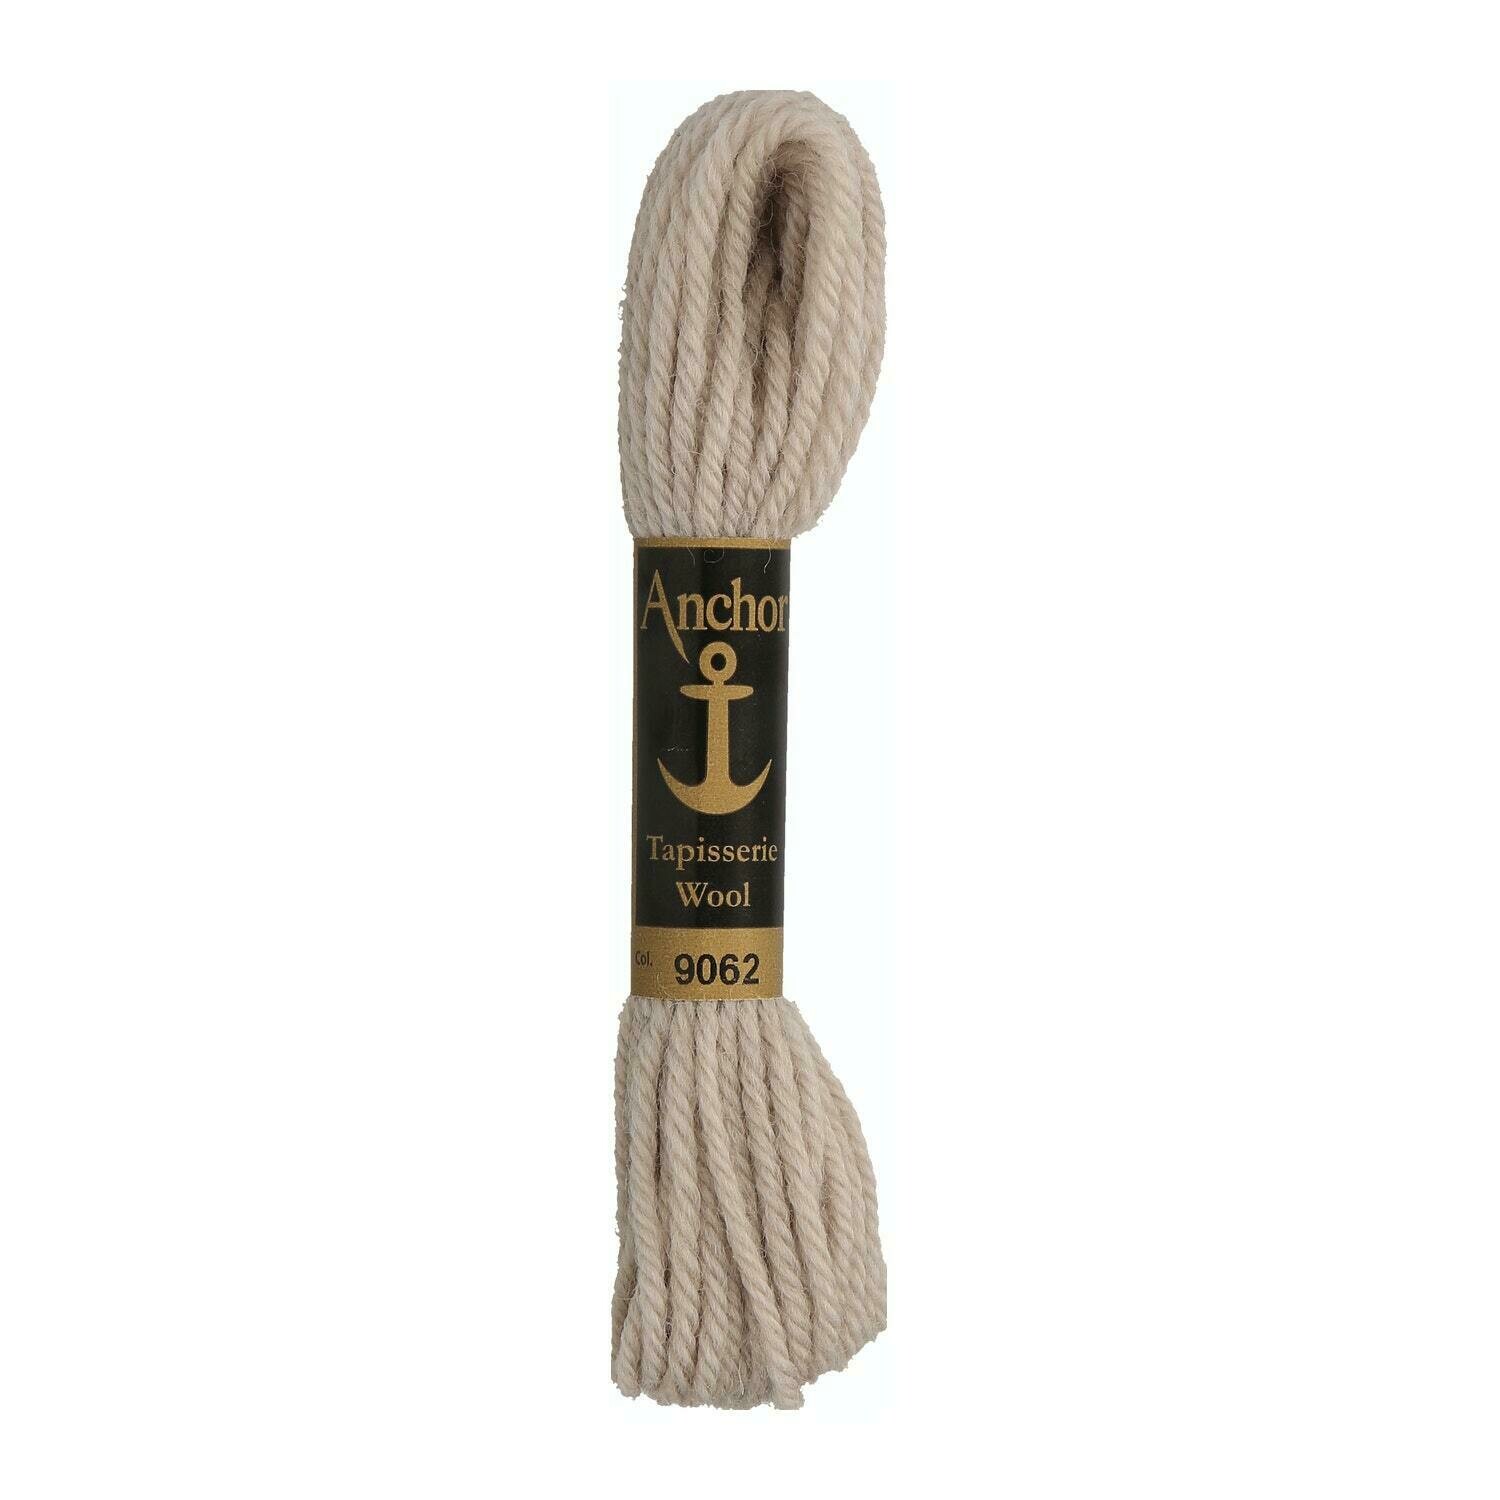 Anchor Tapisserie Wool #09062